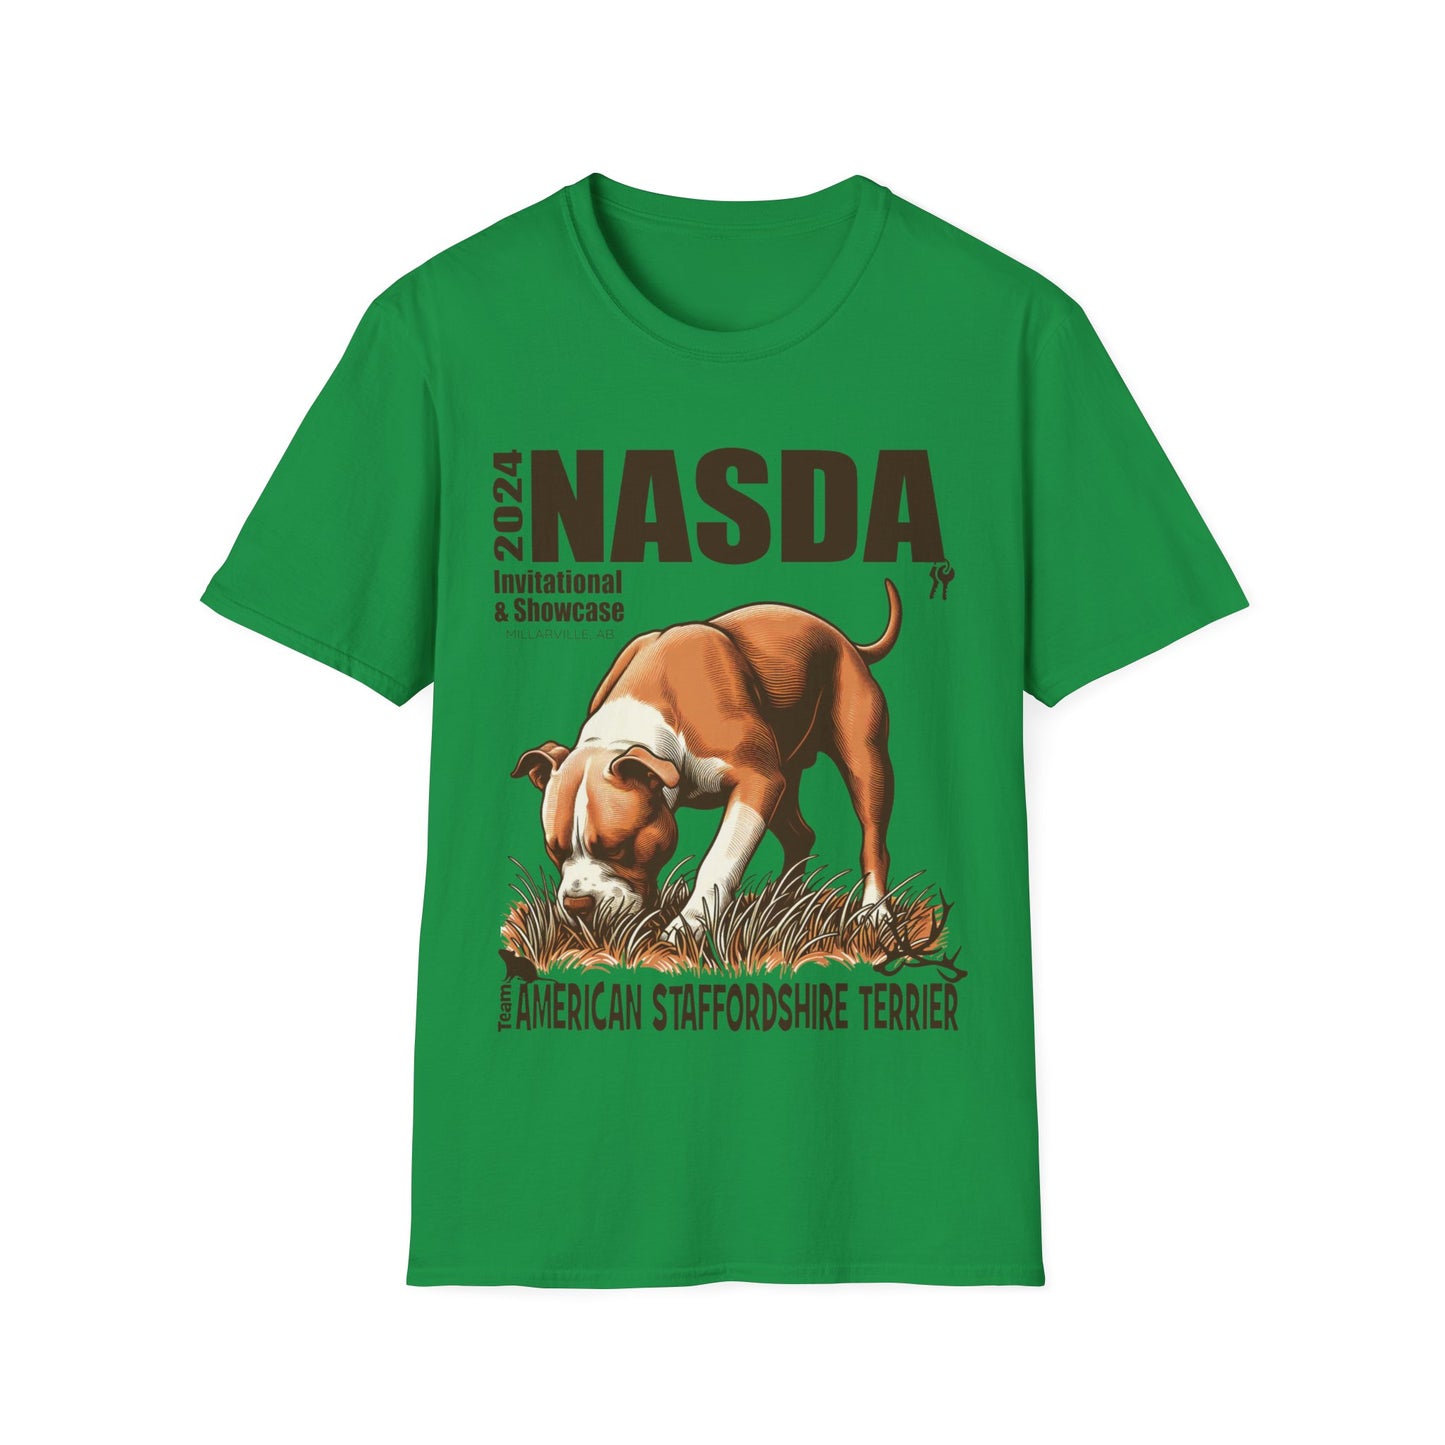 TEAM American Staffordshire Terrier Cropped - NASDA  Unisex Softstyle T-Shirt